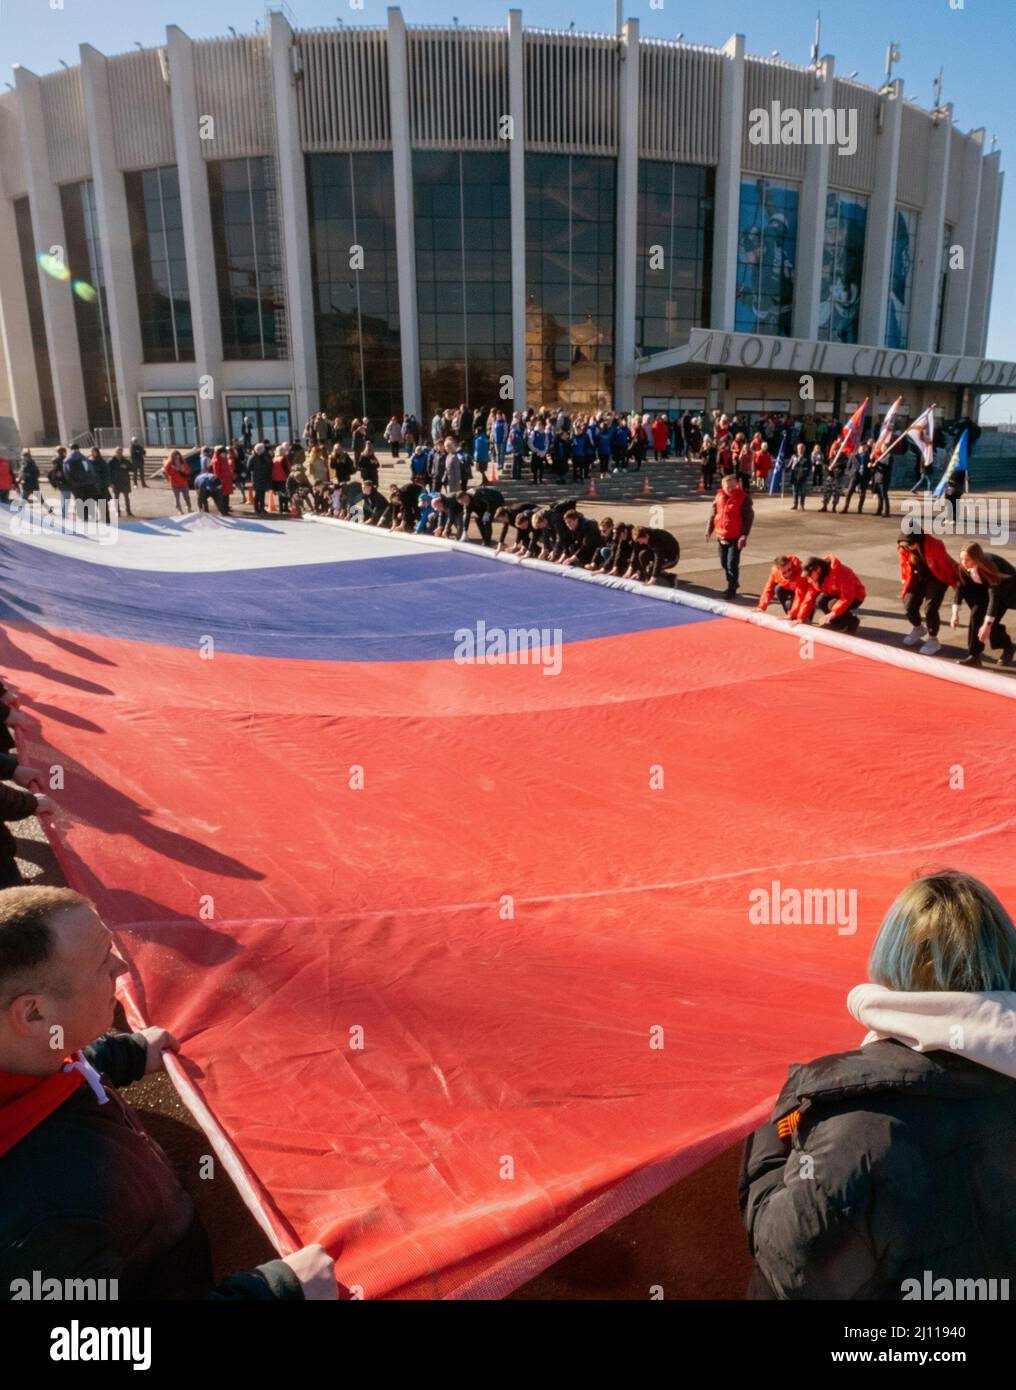 Concert-action dedicated to the eighth anniversary of the reunification of the Crimea with Russia, in the Yubileiny sports complex. Genre photography. Participants roll up a canvas with the colors of the Russian flag near the Yubileiny sports complex. 18.03.2022 Russia, St. Petersburg Photo credit: Aleksey Smagin/Kommersant/Sipa USA Stock Photo